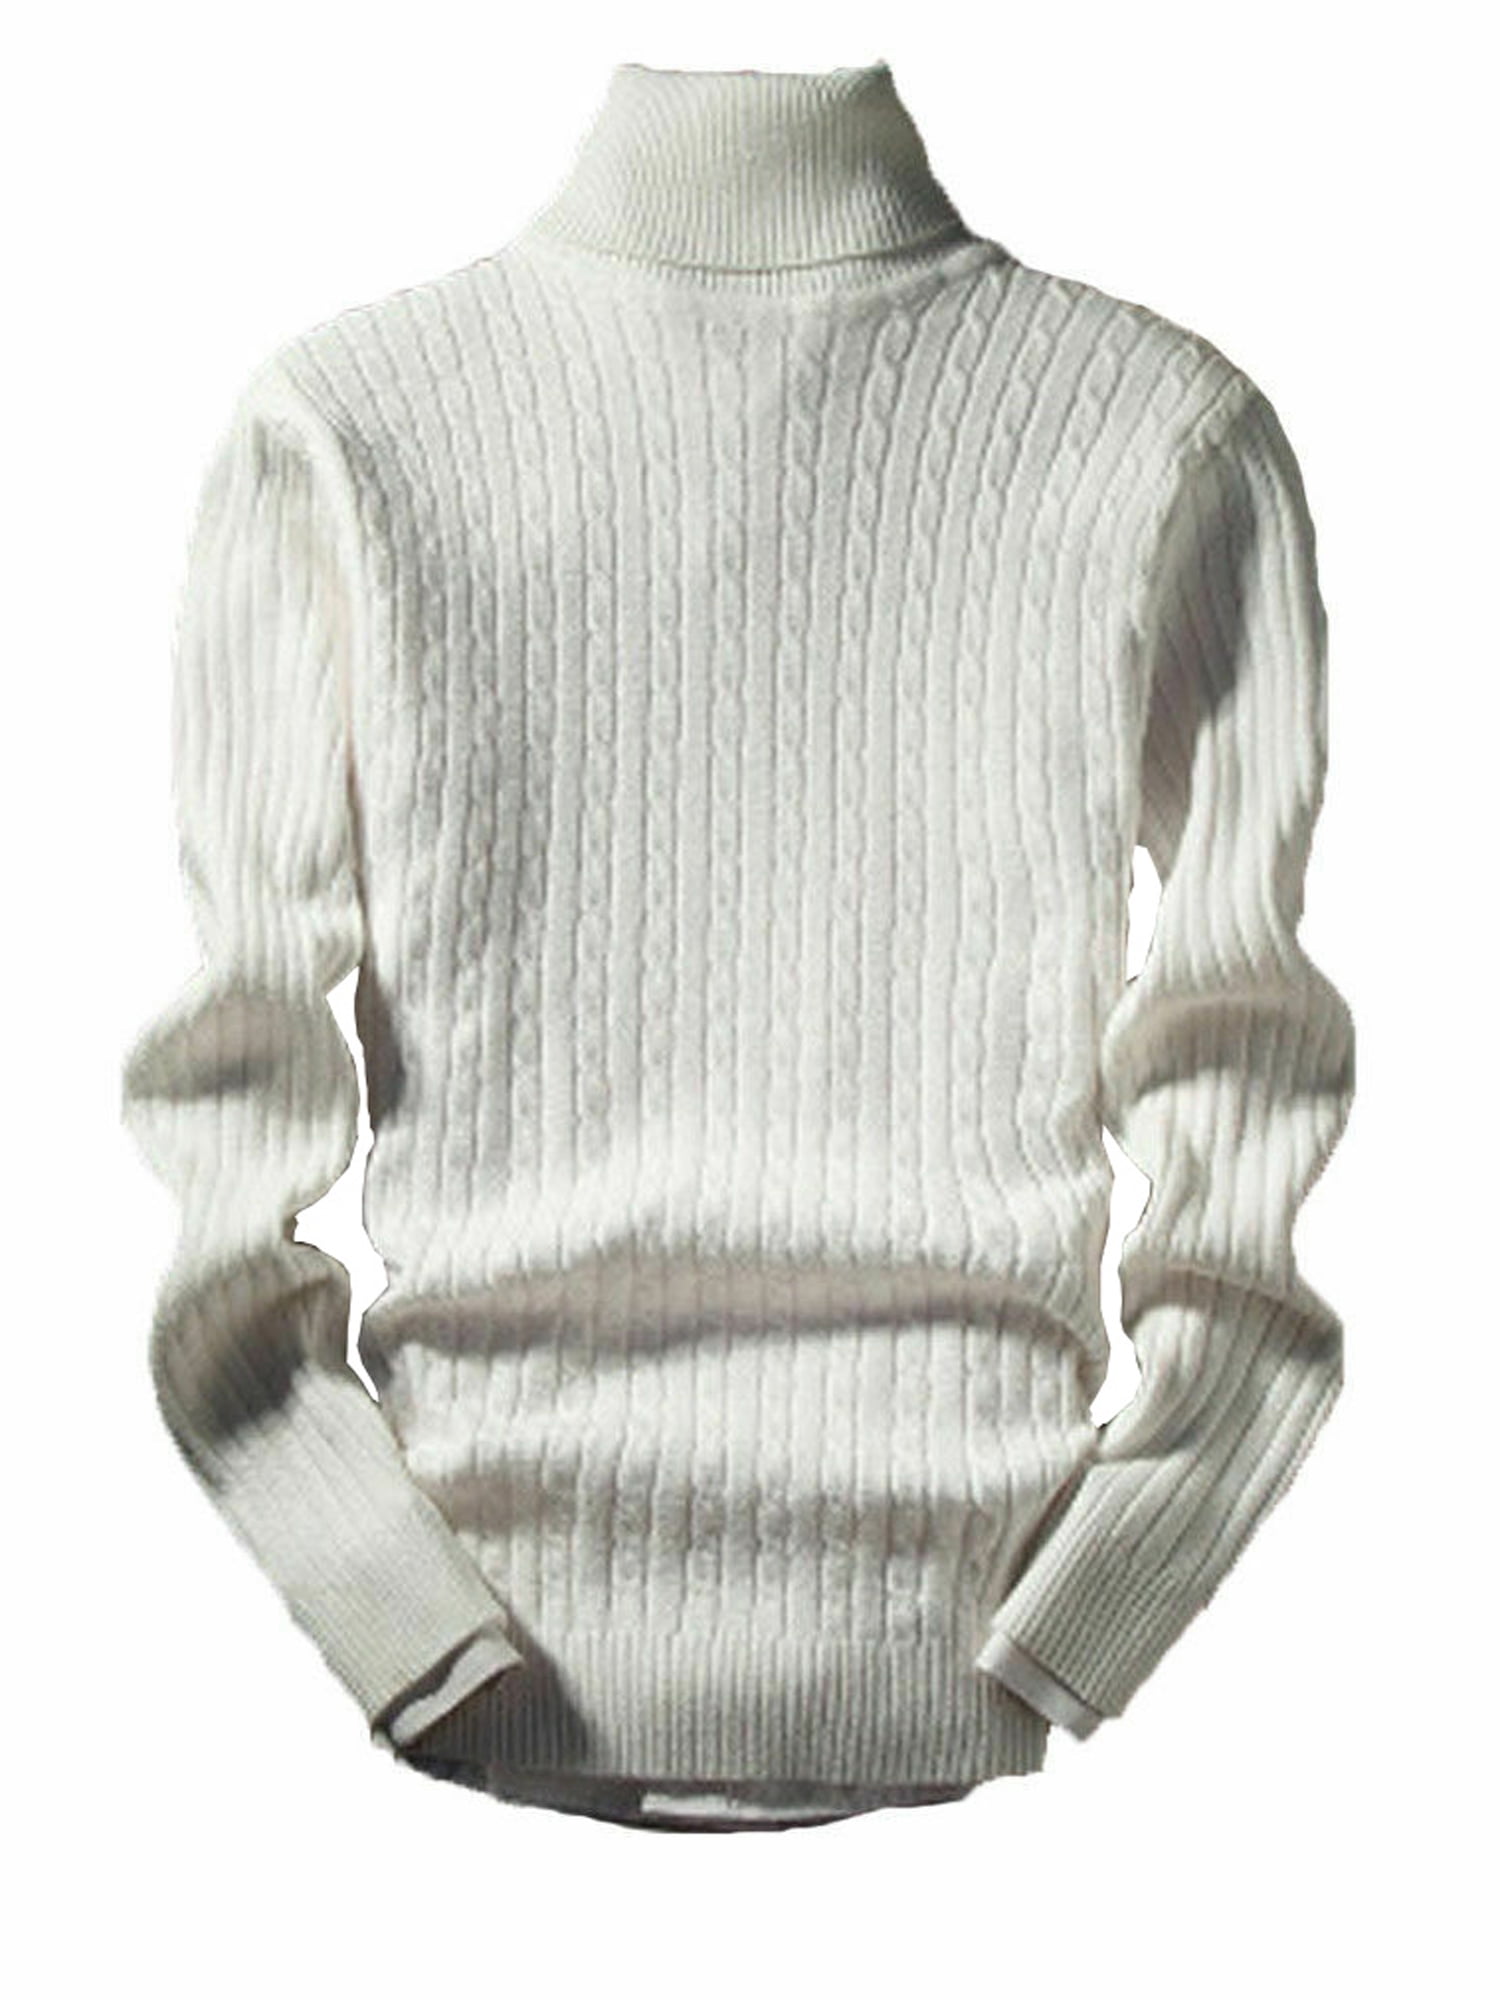 Beloved Mens Sweater Long Sleeve Turtleneck Mixed Ribbed Pullover Sweater 